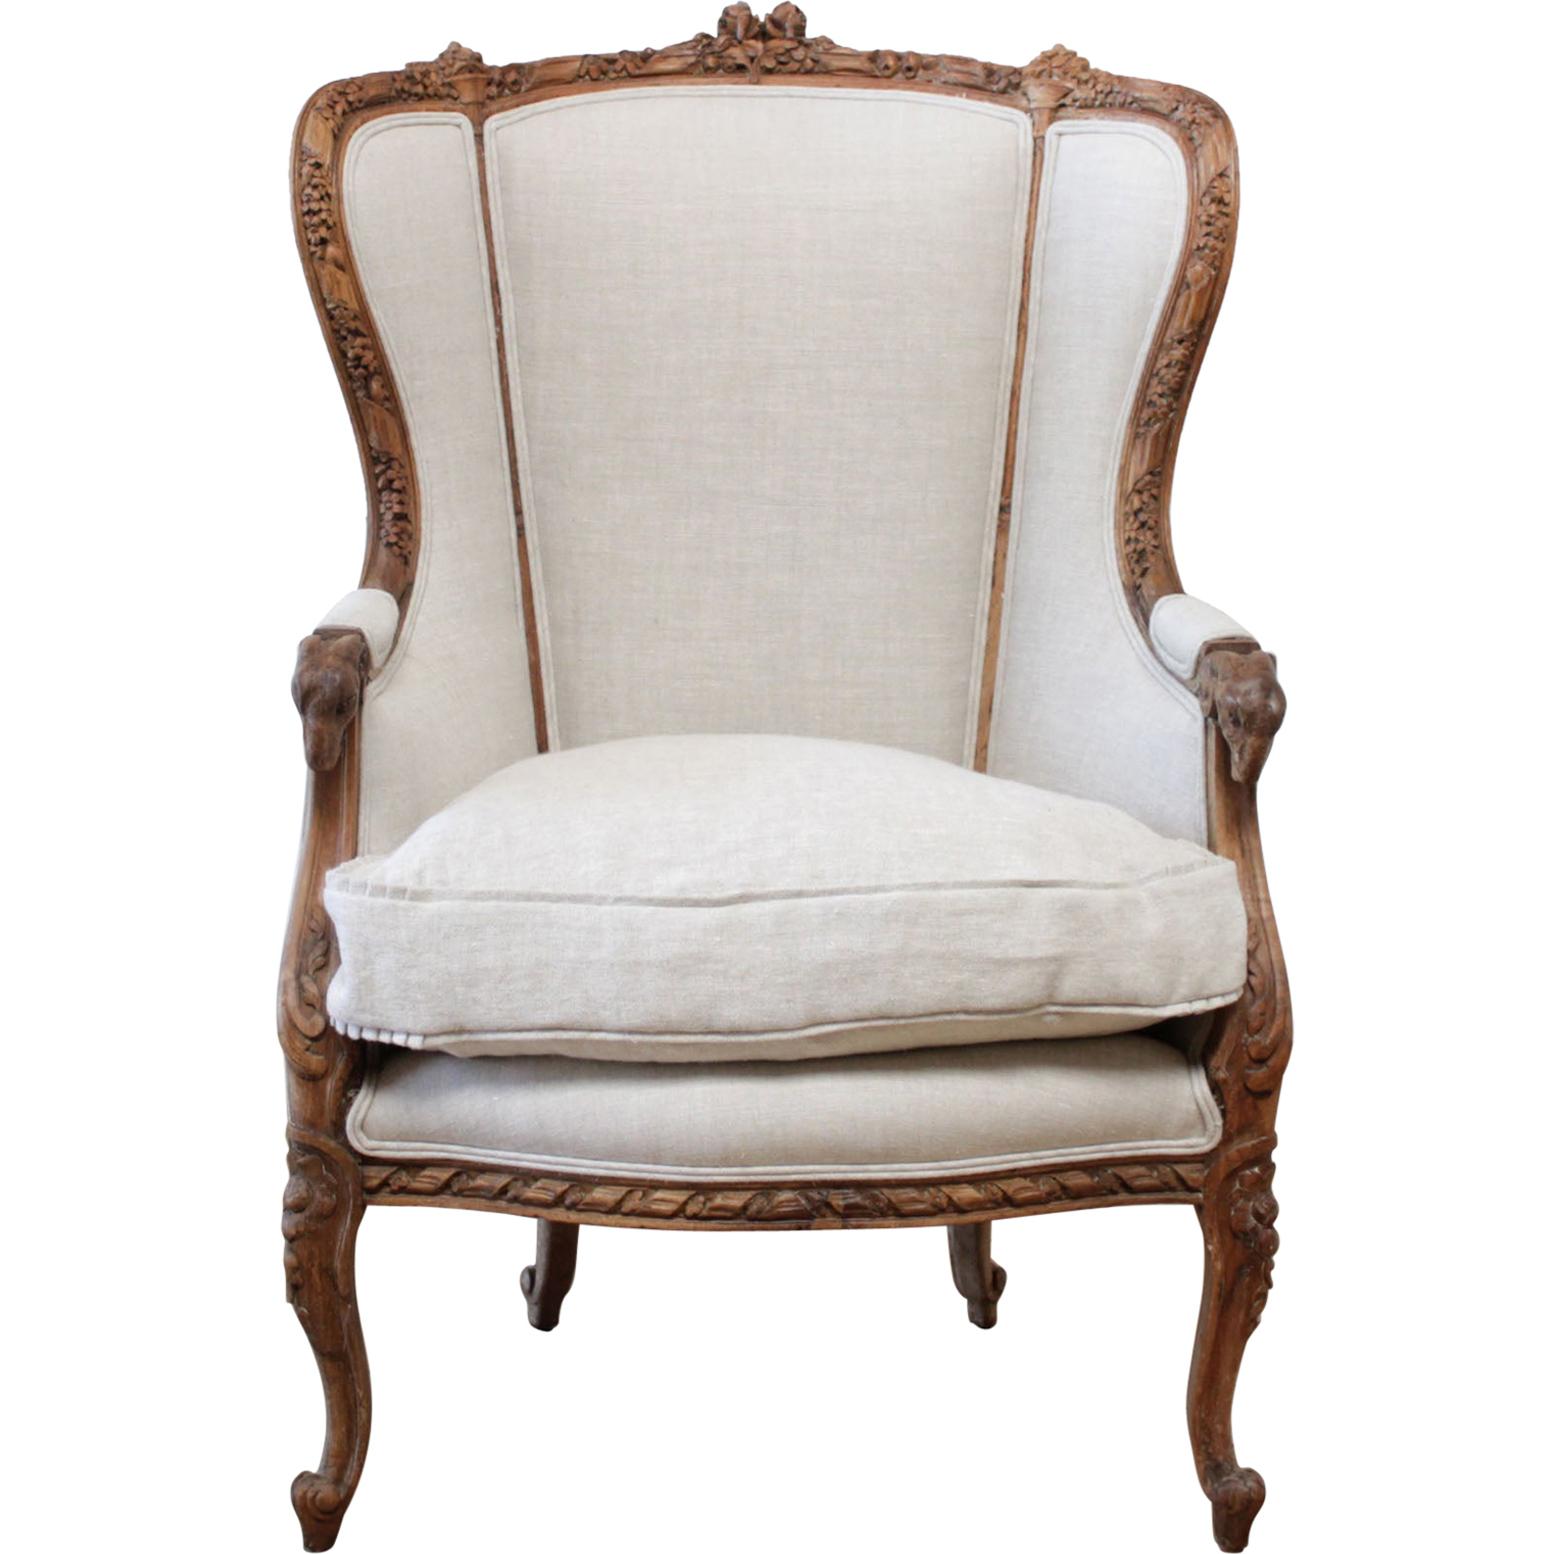 Antique Louis XV Style Carved Wing Chair Upholstered in Natural Linen